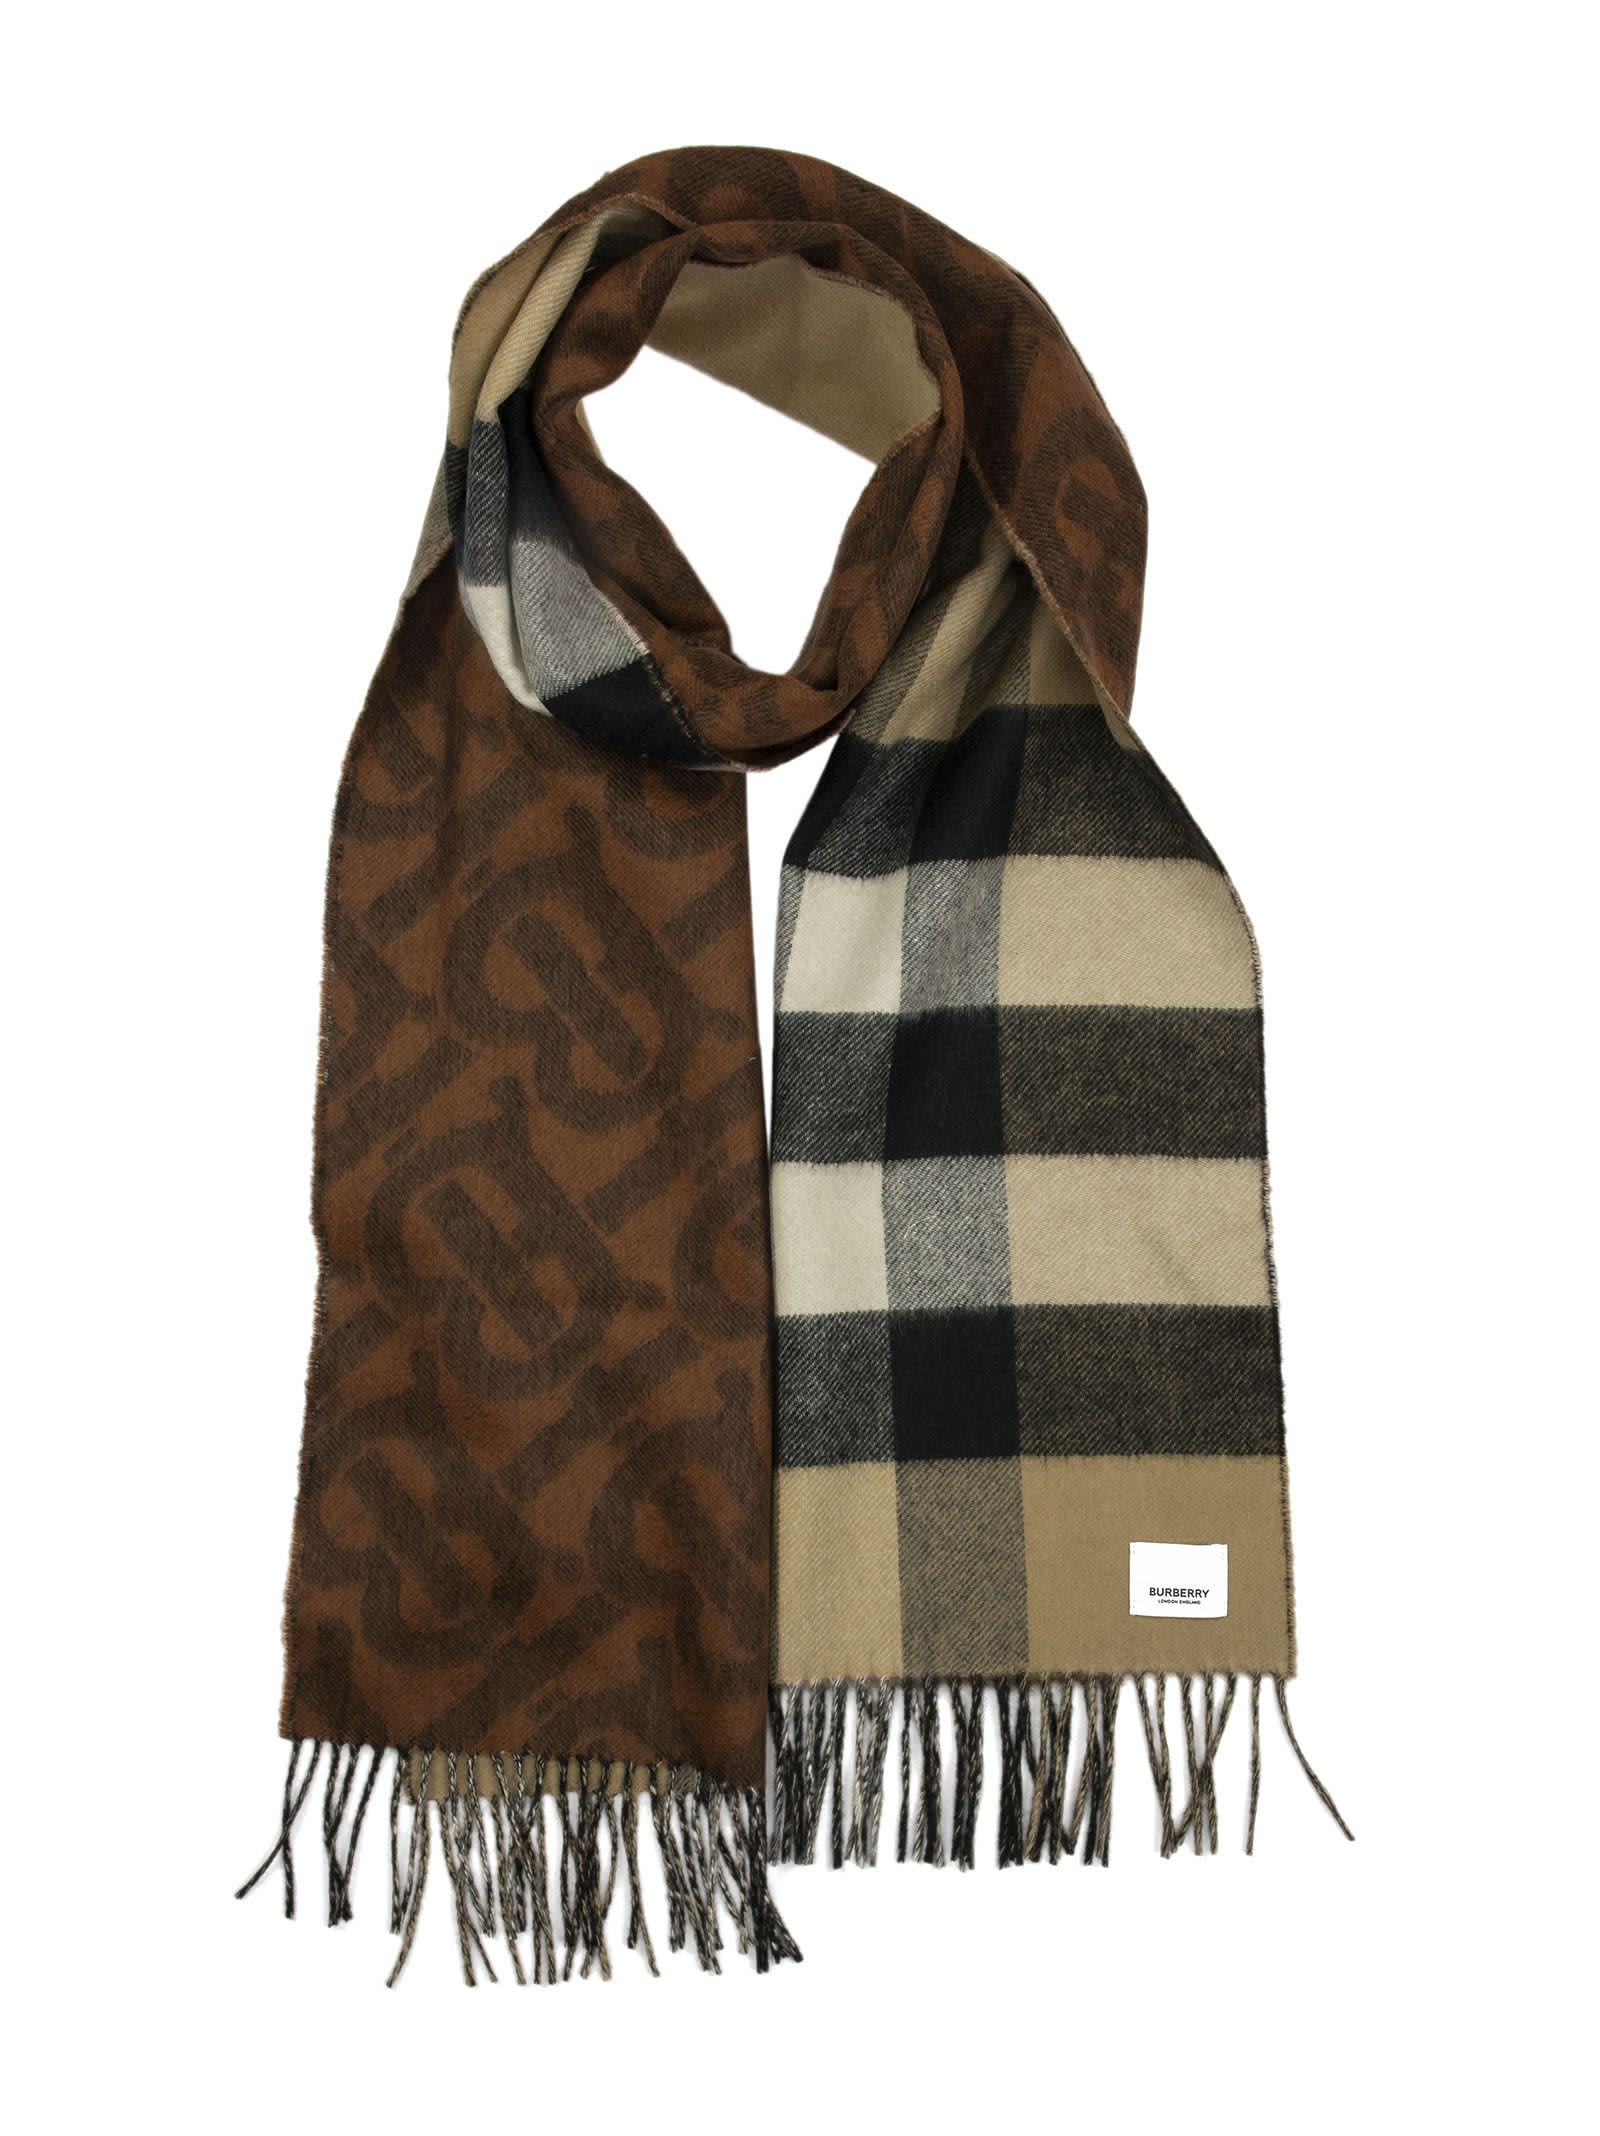 burberry reversible scarf